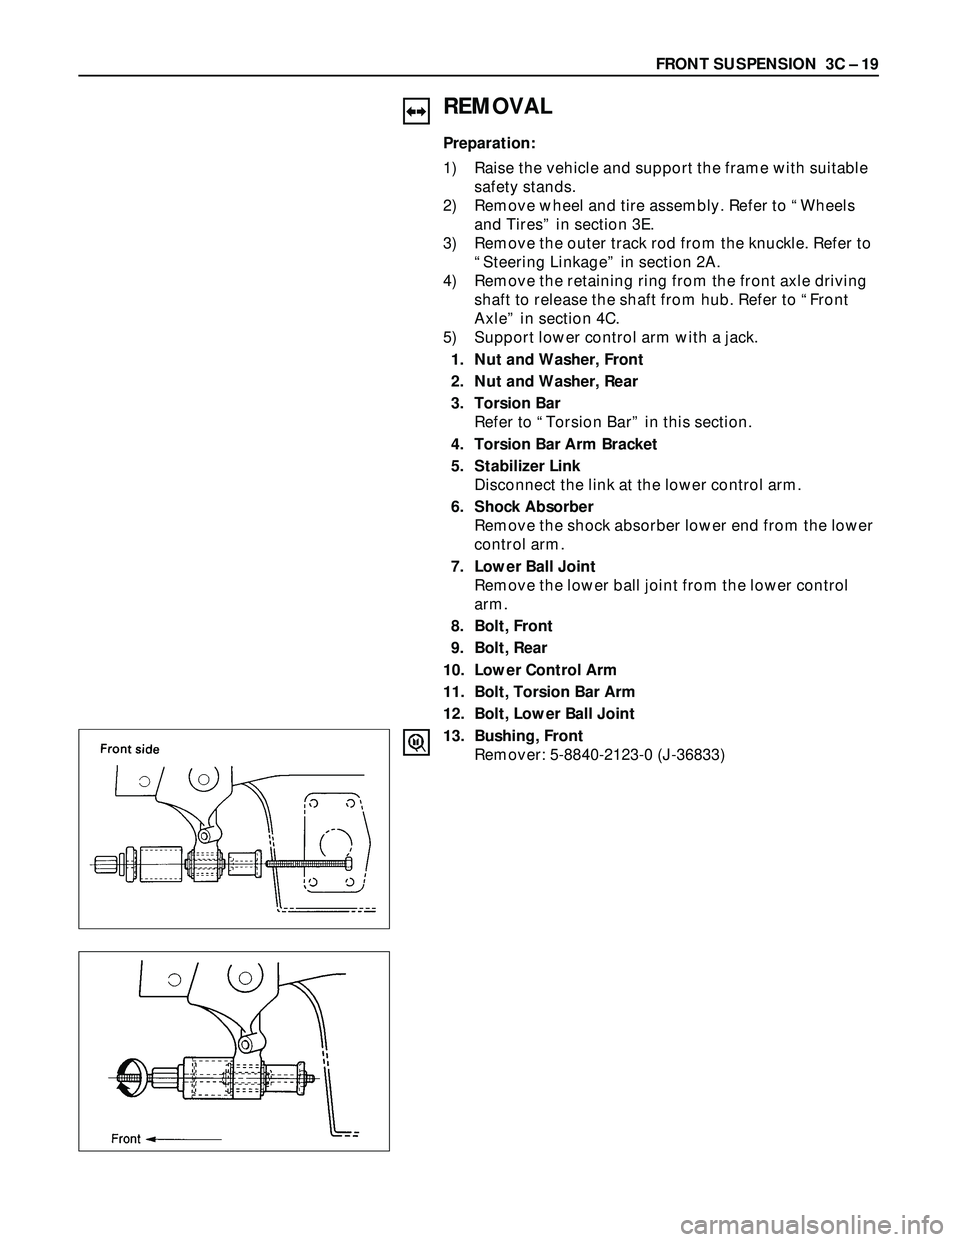 ISUZU TROOPER 1998  Service User Guide FRONT SUSPENSION  3C – 19
REMOVAL
Preparation:
1) Raise the vehicle and support the frame with suitable
safety stands.
2) Remove wheel and tire assembly. Refer to “Wheels
and Tires” in section 3